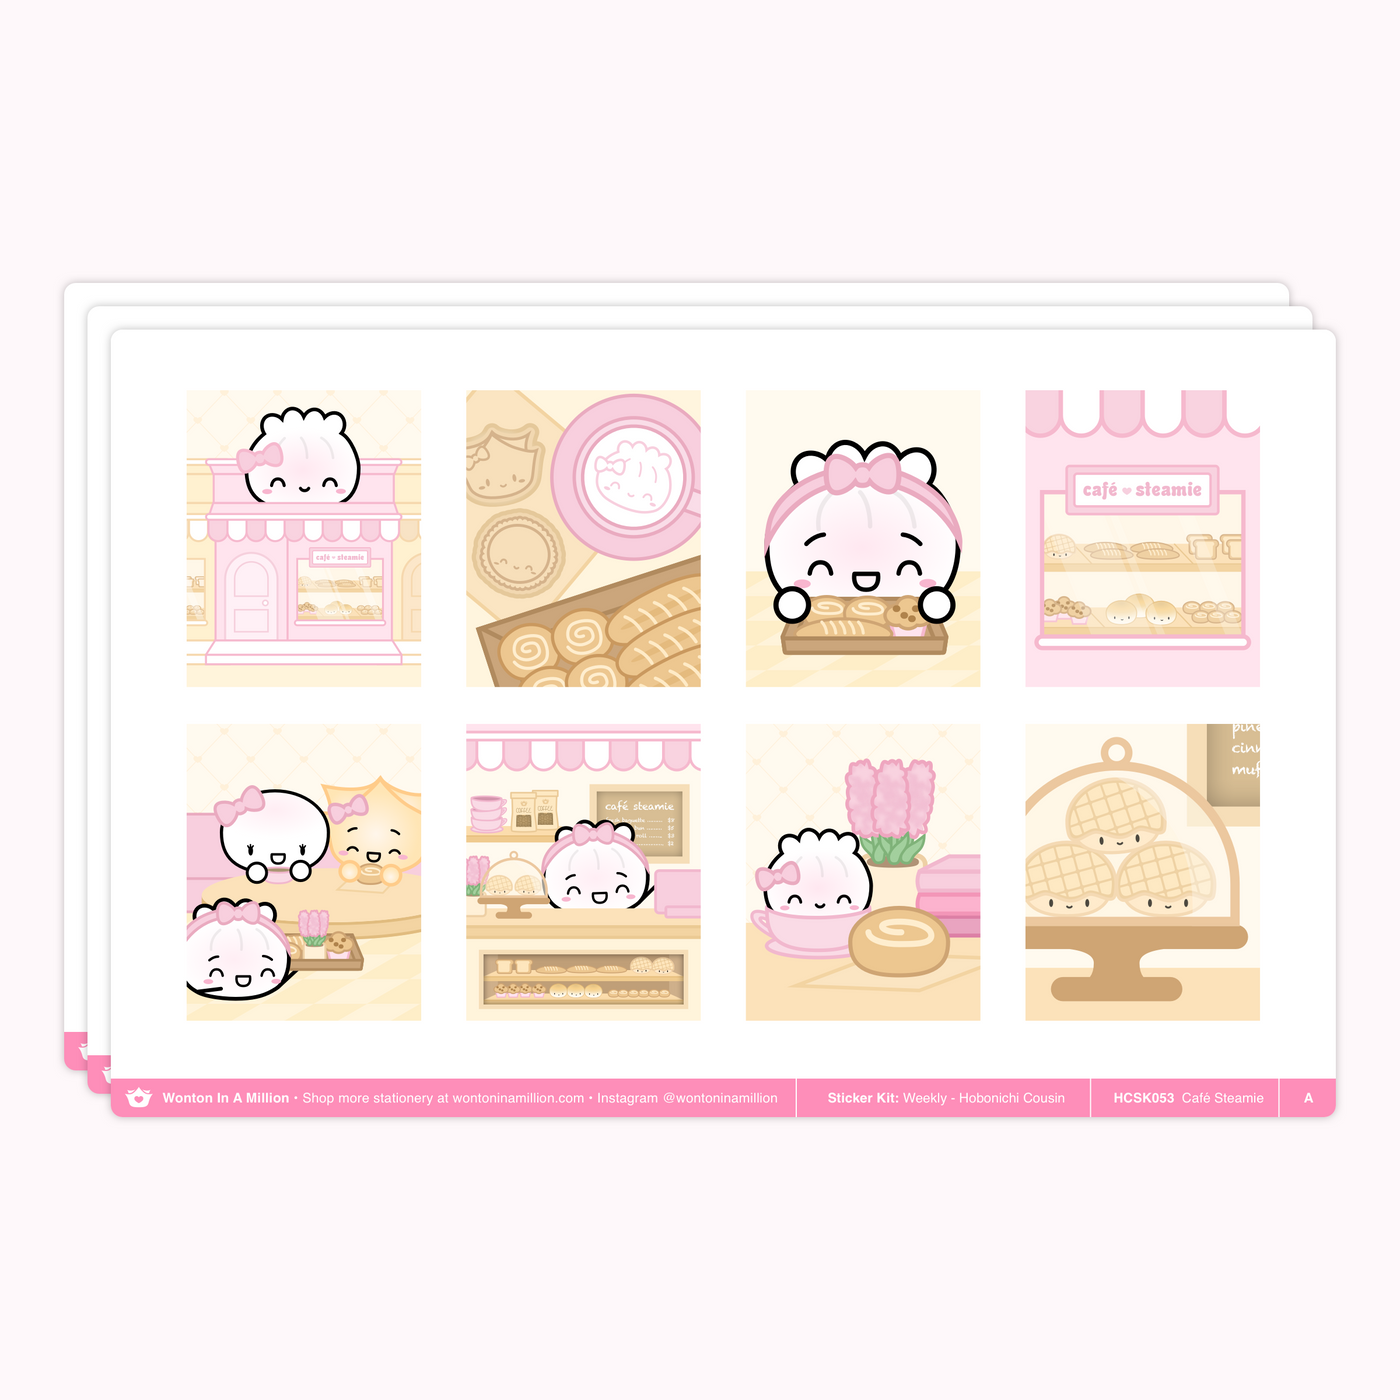 Cafe Steamie Weekly Sticker Kit (Hobonichi Cousin)